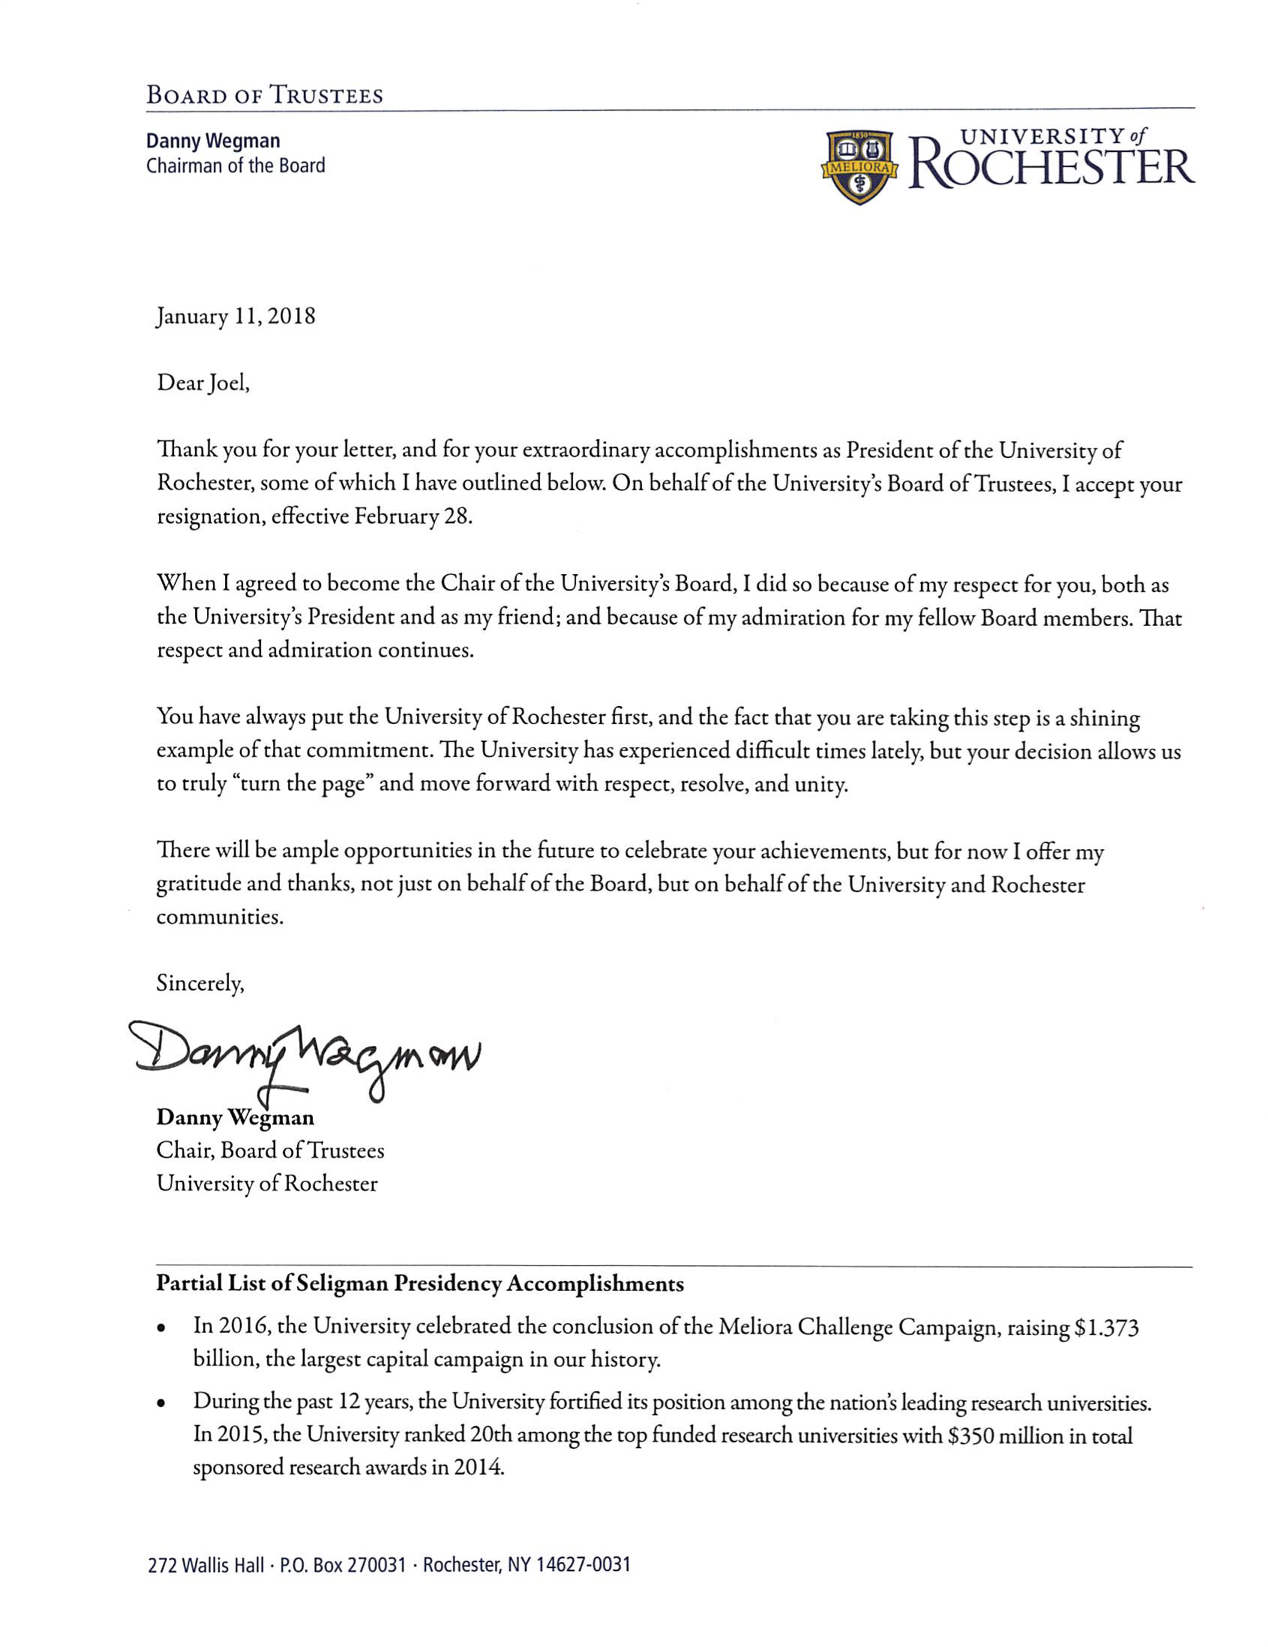 Letter from Danny Wegman, Chair of the Board of Trustees, University of Rochester